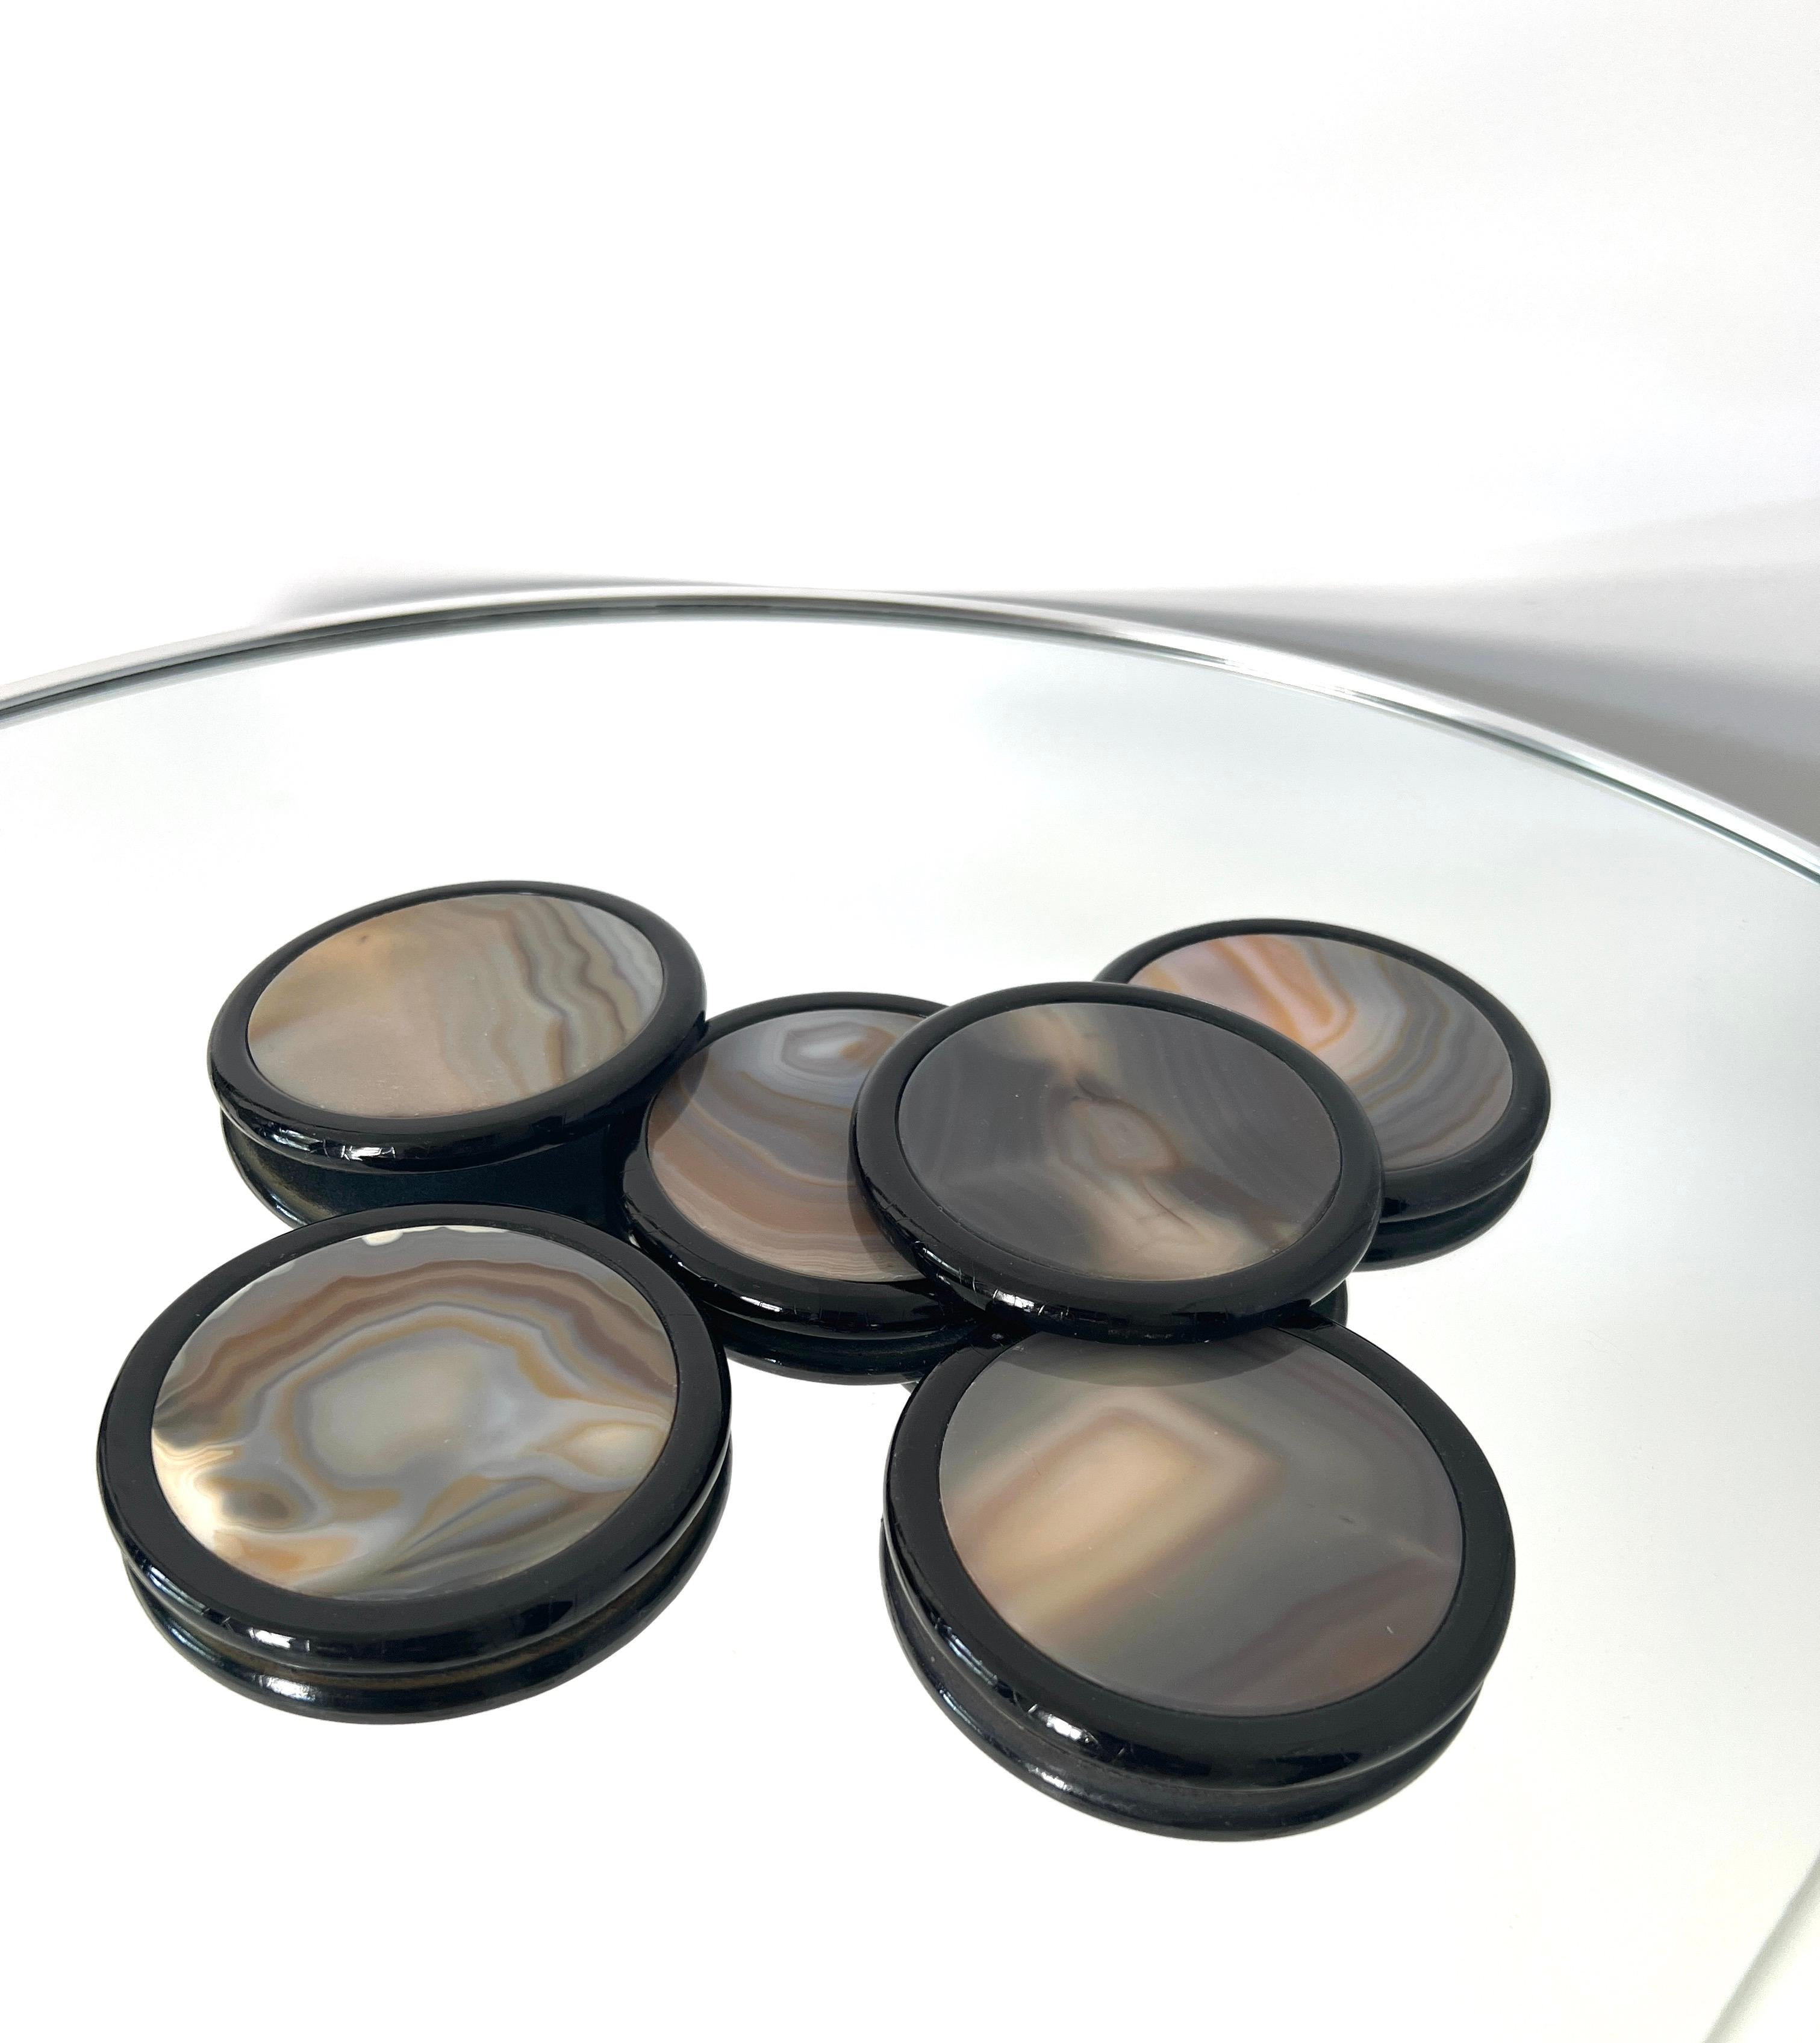 Coaster Set Vintage Agate Stone with Black Lacquered Finish, c. 1970s In Good Condition For Sale In Fort Lauderdale, FL